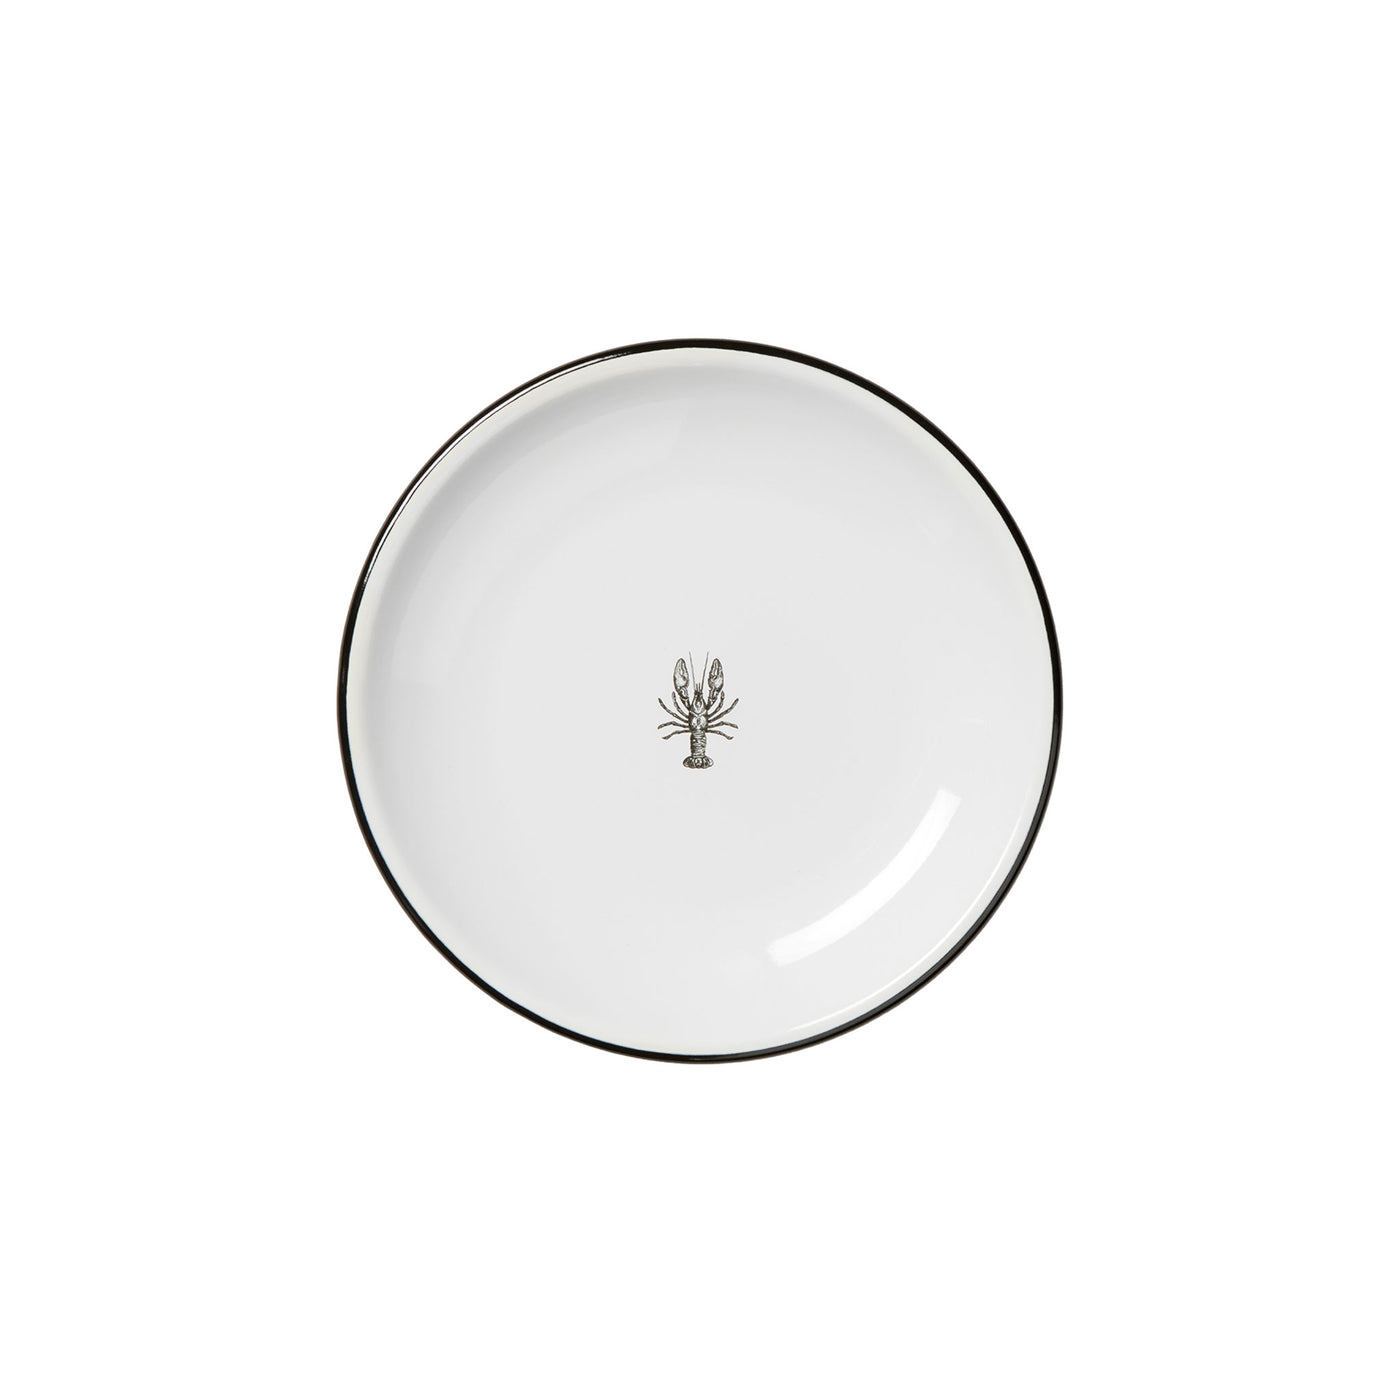 Crow Canyon | Weston Table x CCH Lobster Coupe Salad Plate, Black Rim